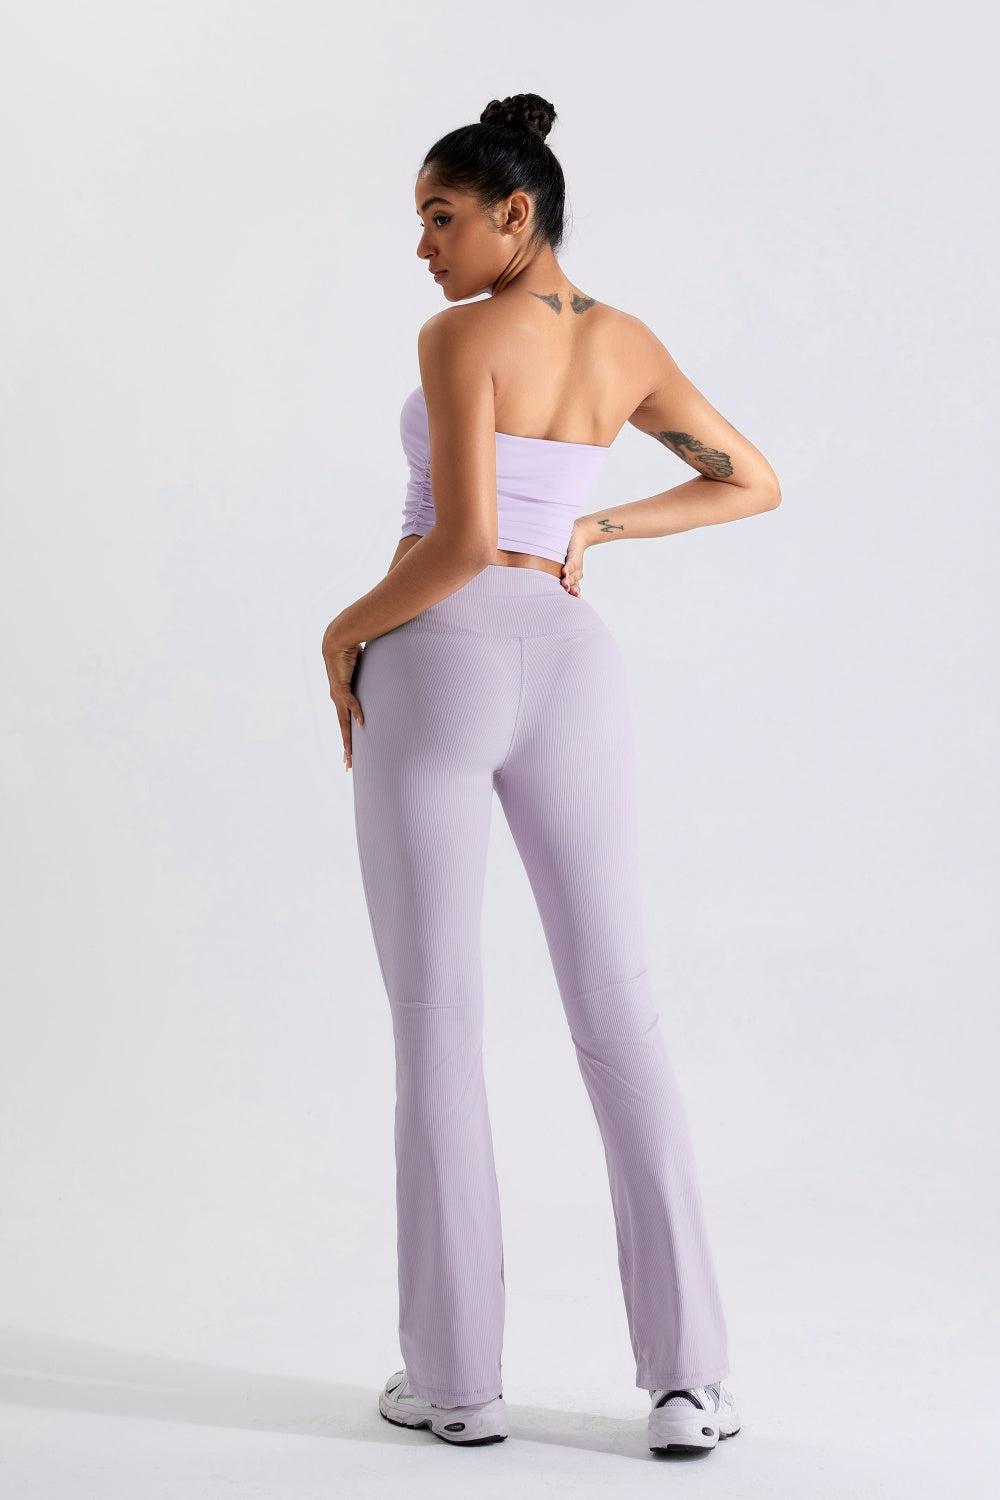 a woman in a white top and purple pants